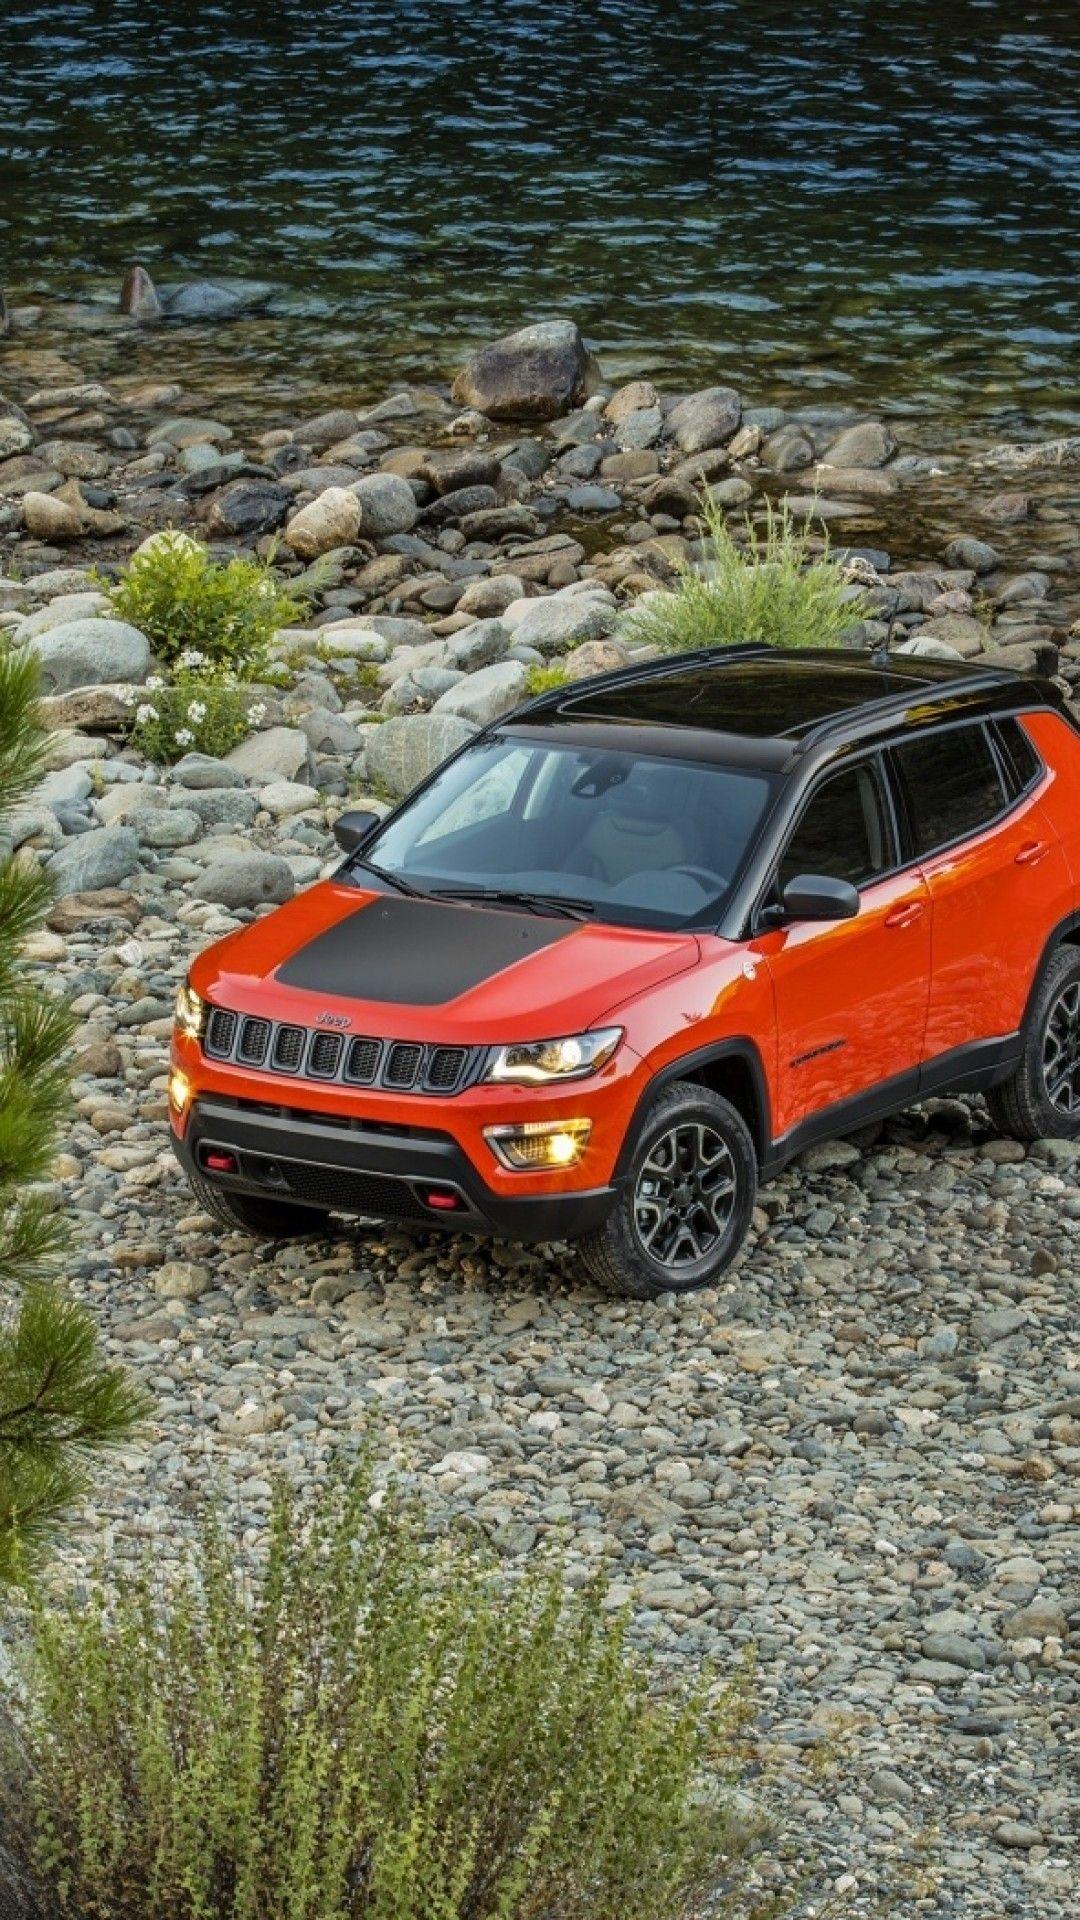 Silver 2022 Jeep Compass Wallpaper, HD Cars 4K Wallpapers, Images and  Background - Wallpapers Den